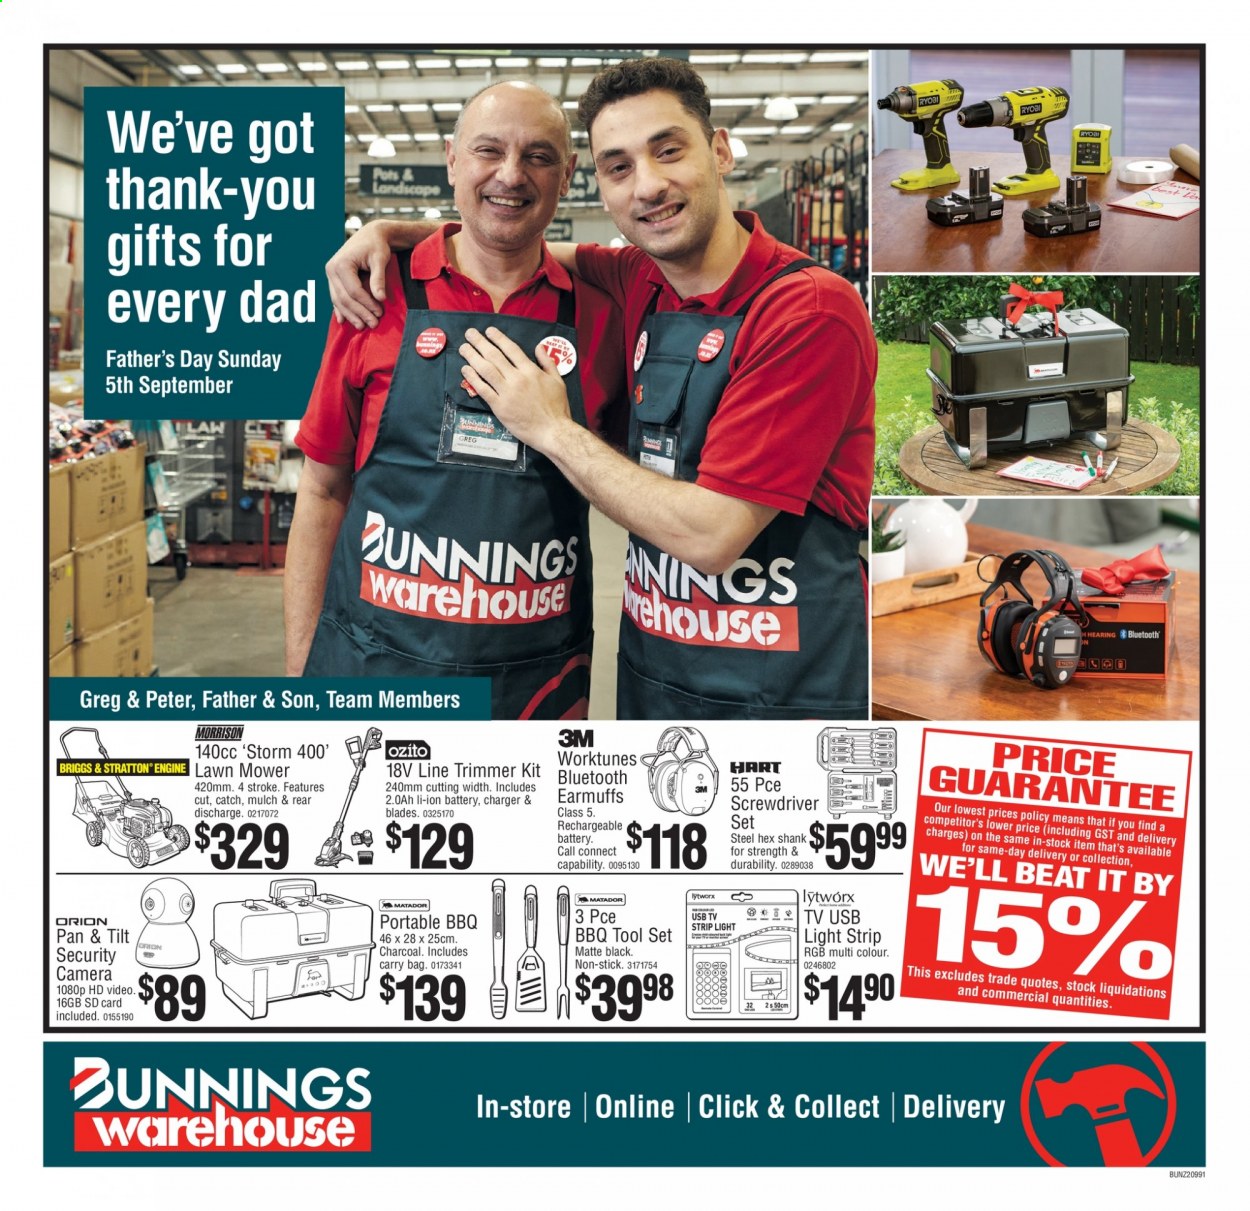 thumbnail - Bunnings Warehouse mailer - 24.08.2021 - 05.09.2021 - Sales products - rechargeable battery, security camera, light strip, screwdriver, Ryobi, lawn mower, tool set, screwdriver set, earmuffs, bluetooth earmuffs, portable barbecue, pot, garden mulch. Page 1.